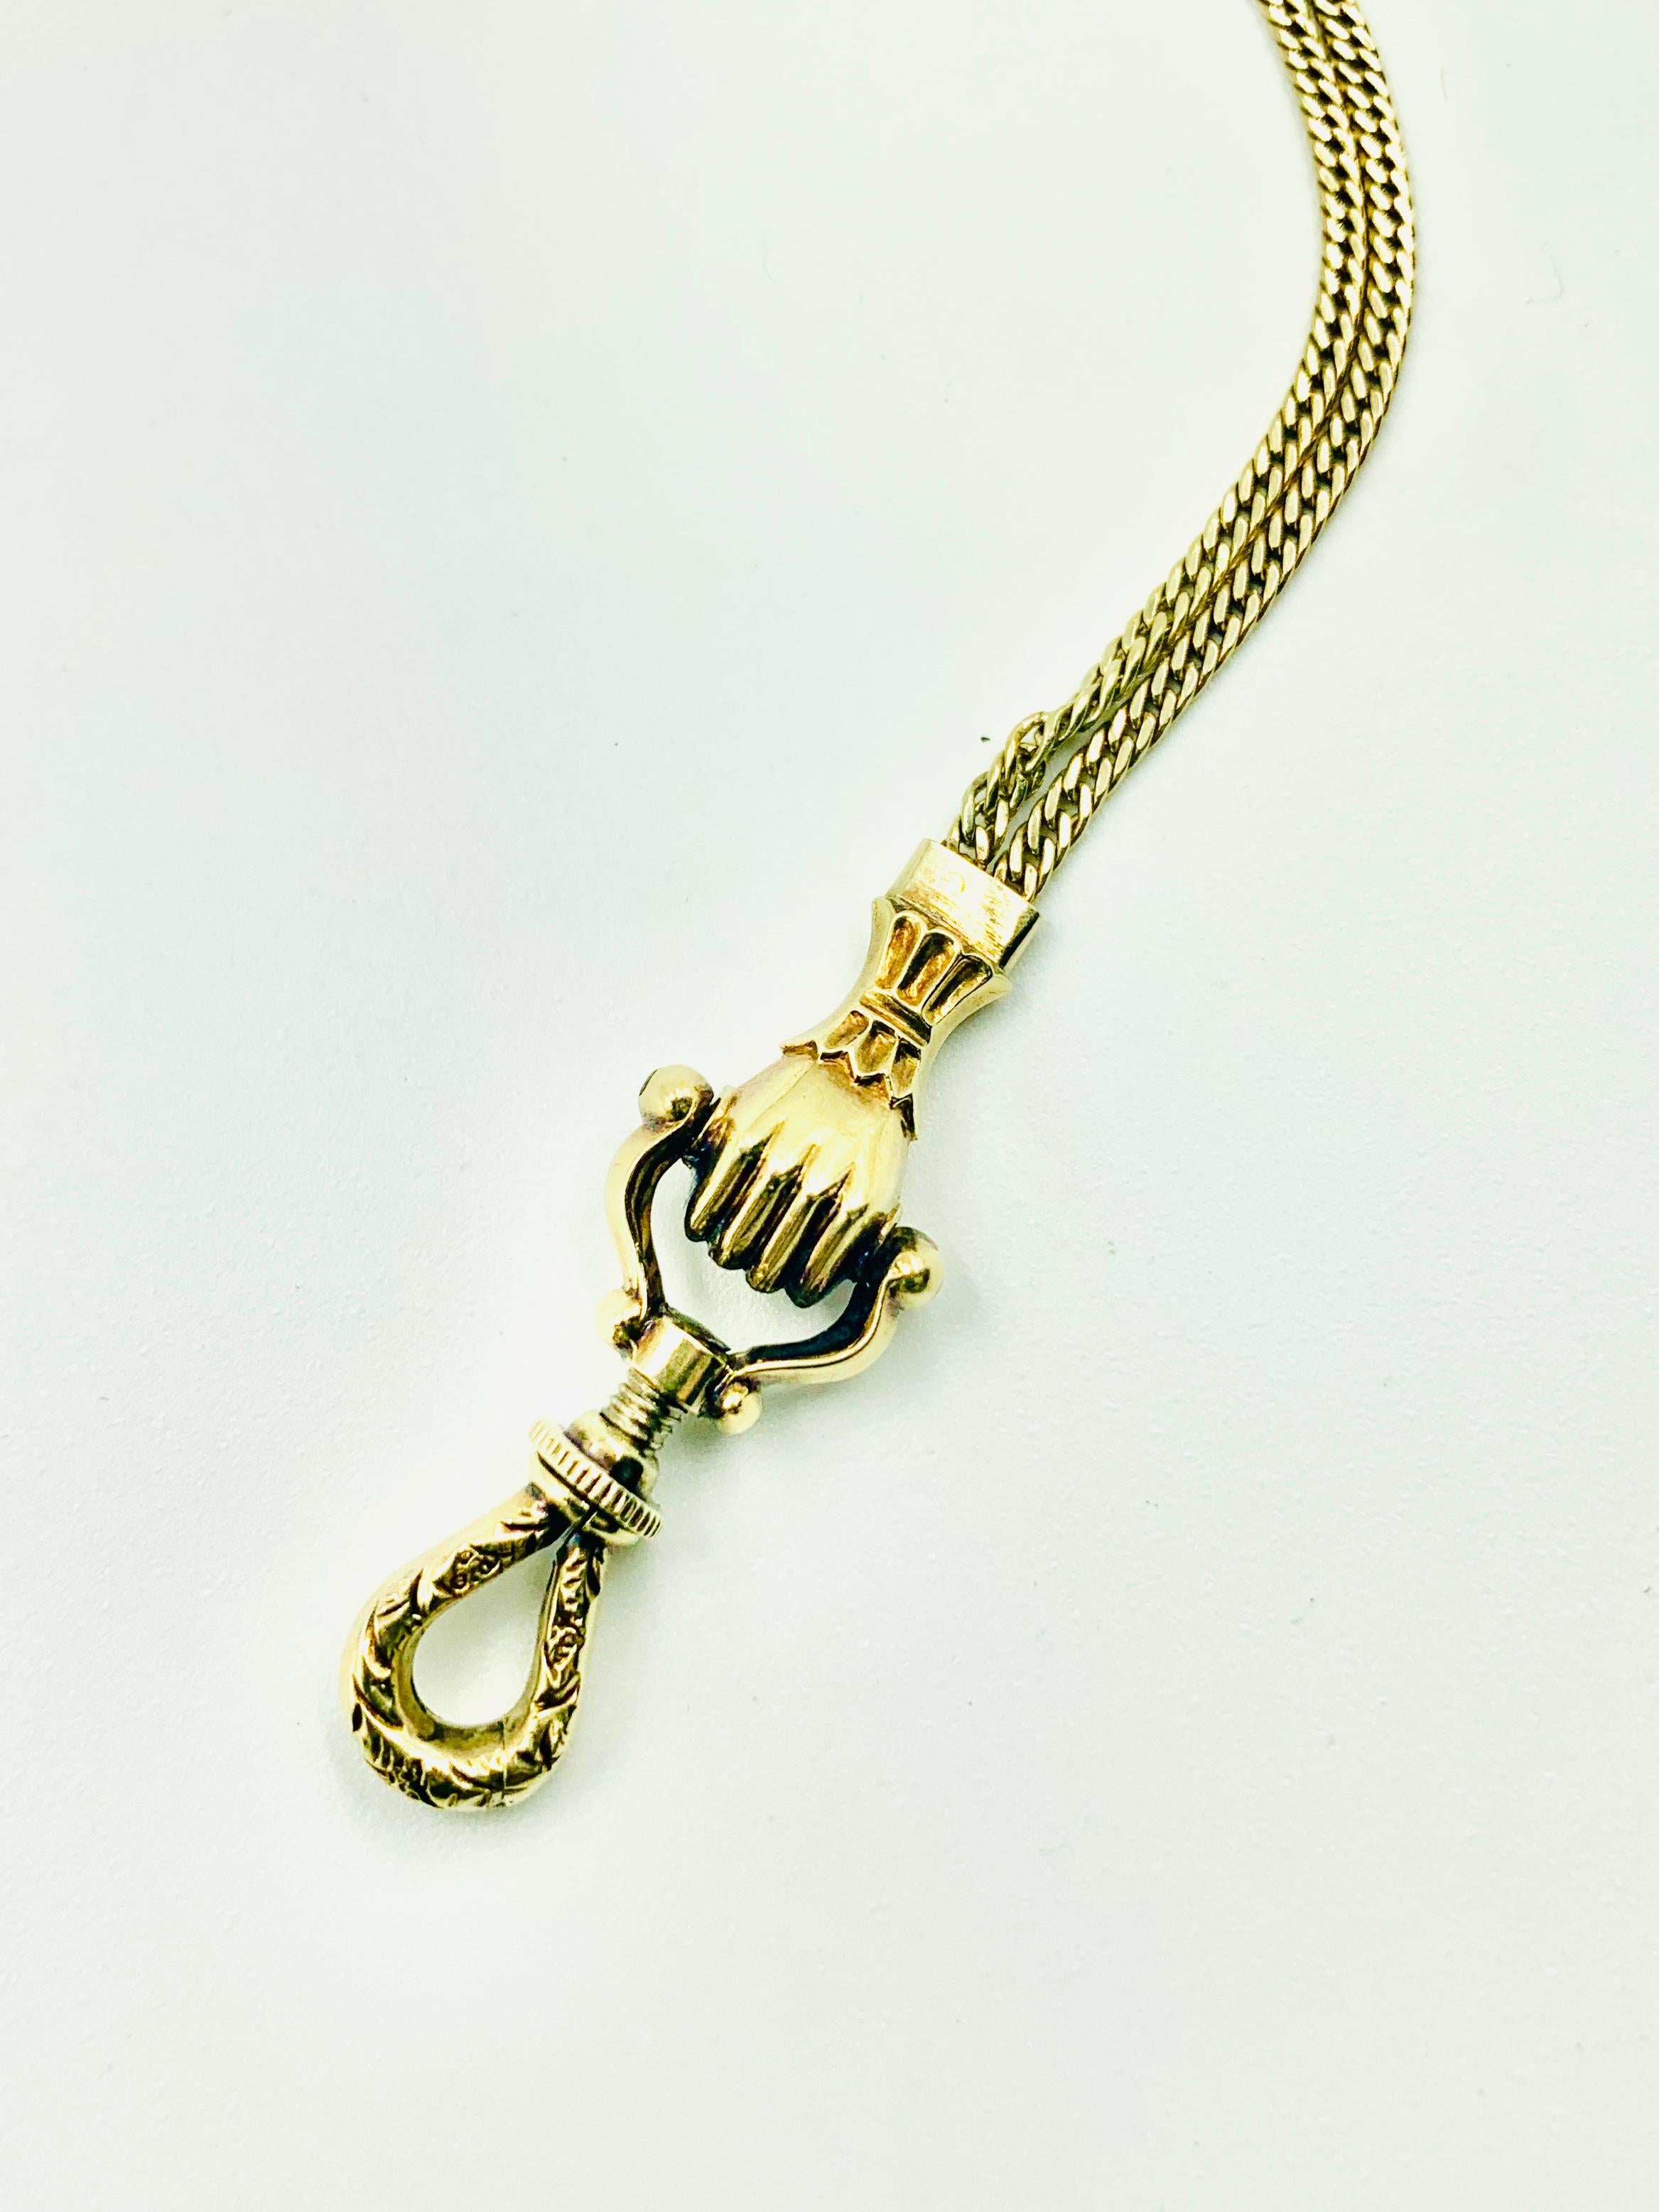 Exceptionally Long Antique 18K Gold Mano Sautoir Slide Chain Necklace Circa 1840 For Sale 2